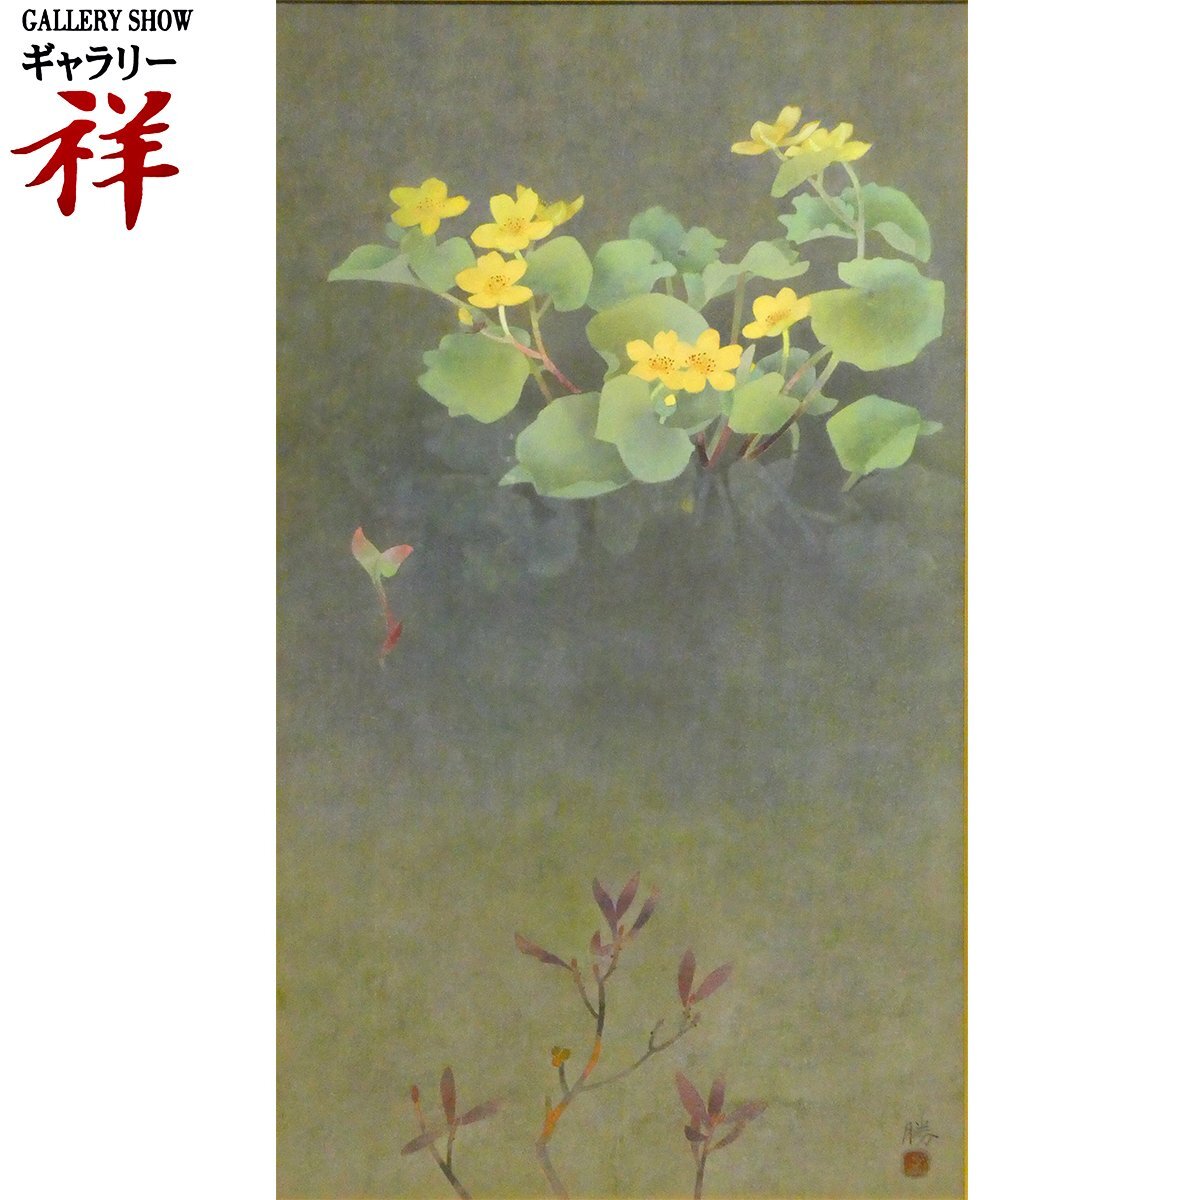 Sho [Authentic work] Masaru Matsumoto Mizu Onmu Japanese painting No. 25 Signed, Seal, Born in Tokyo, Teacher: Togyu Okumura, Japan Art Institute special offer, Handwritten, One-of-a-kind [Gallery Sho], painting, Japanese painting, flowers and birds, birds and beasts